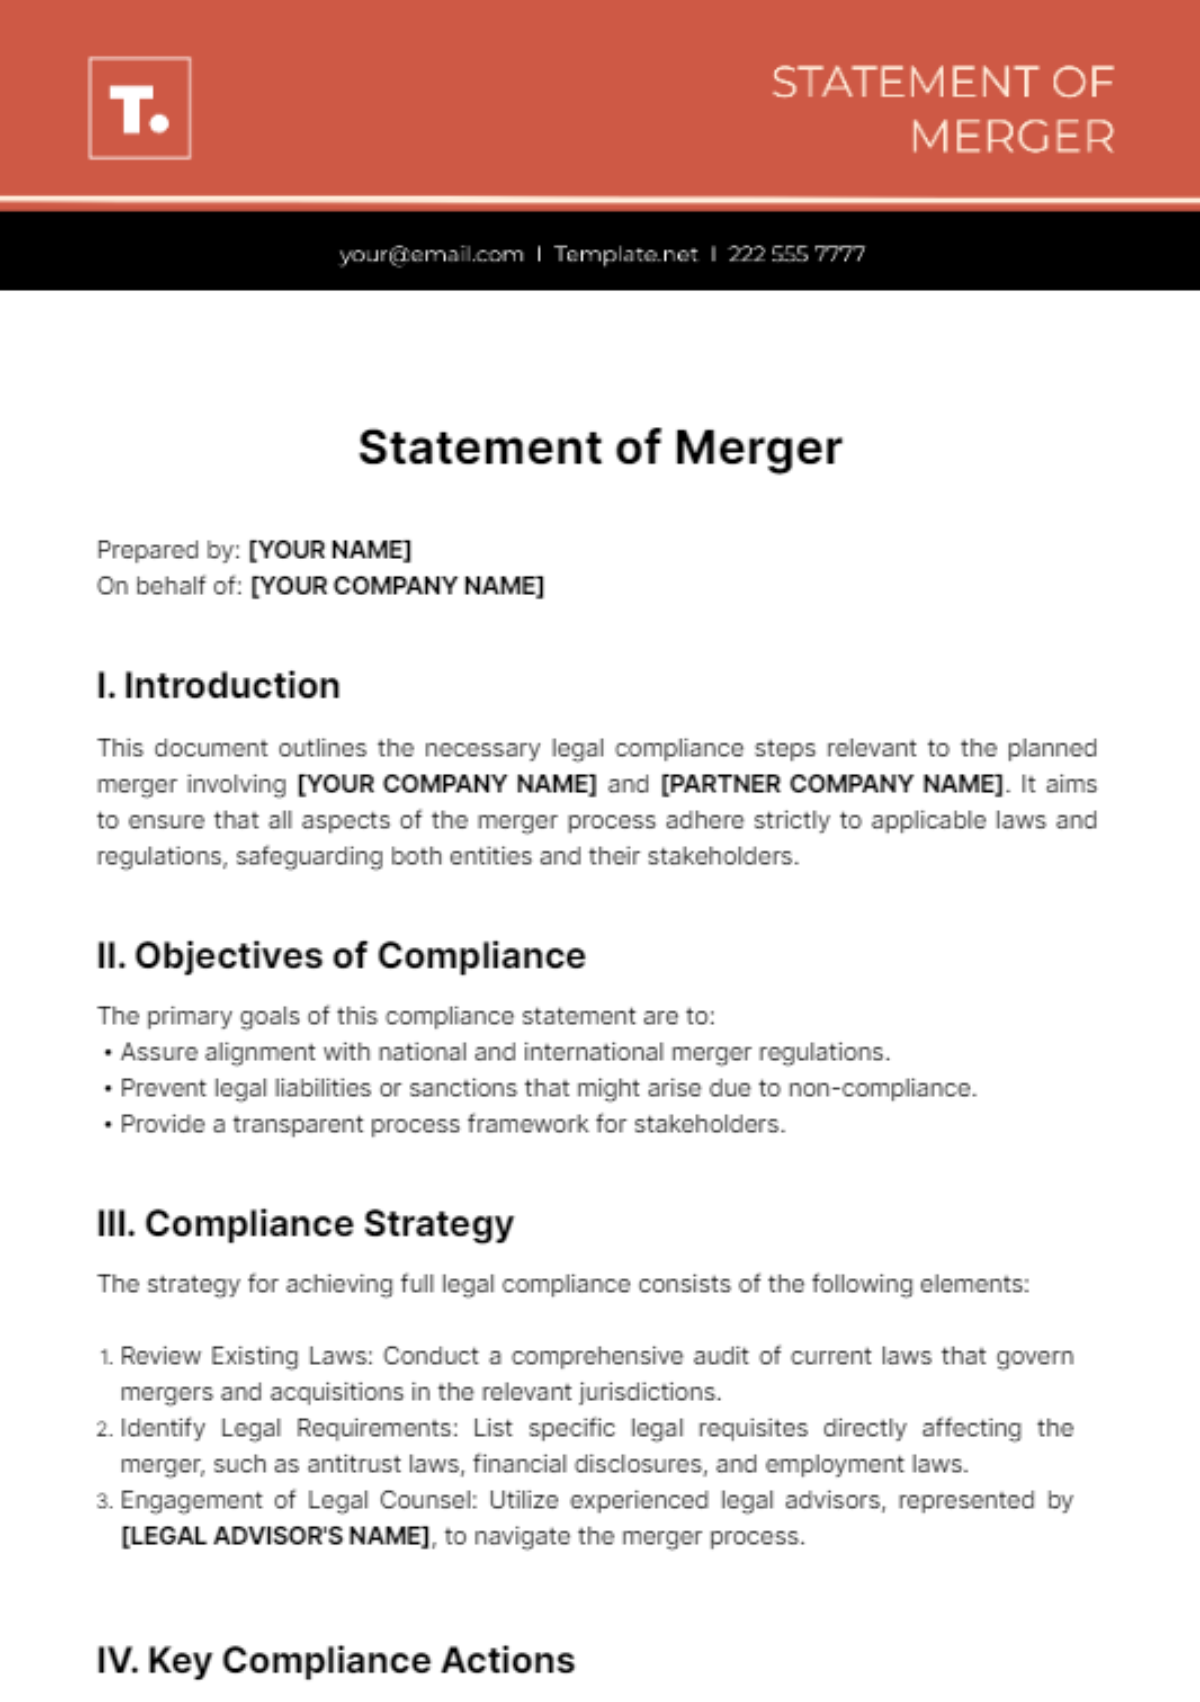 Statement of Merger Template